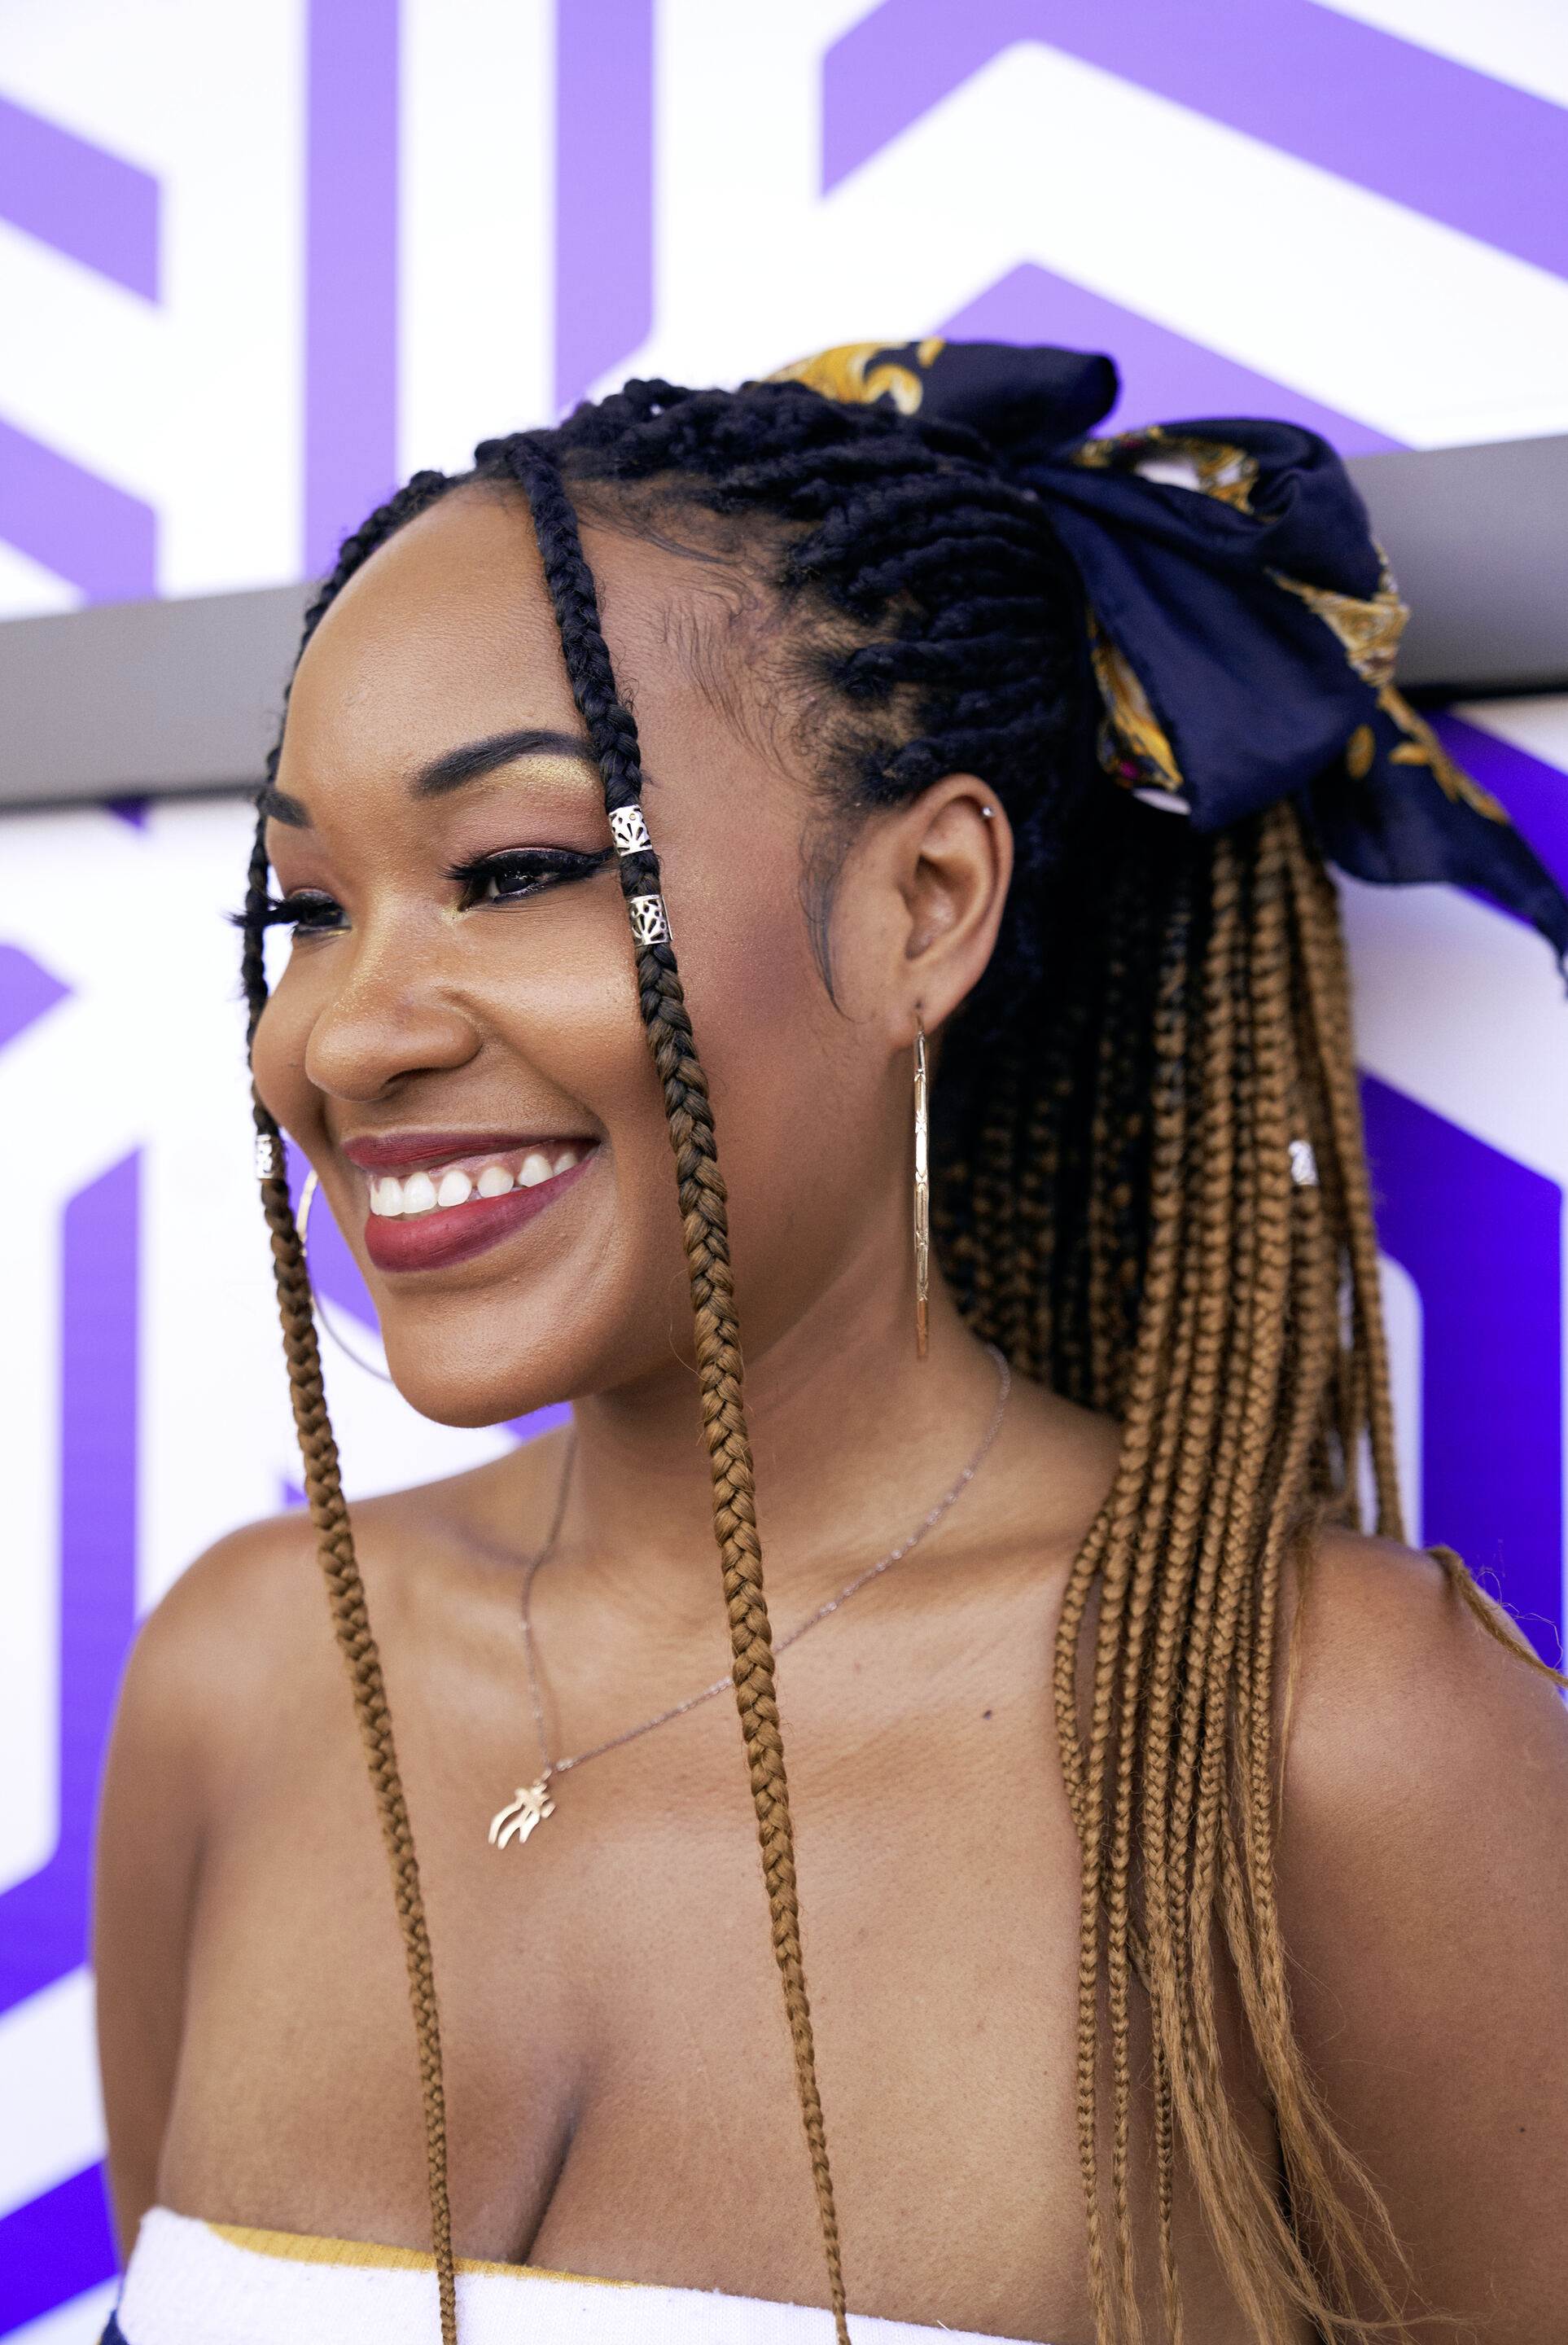 A girl with ombre braids against a purple background